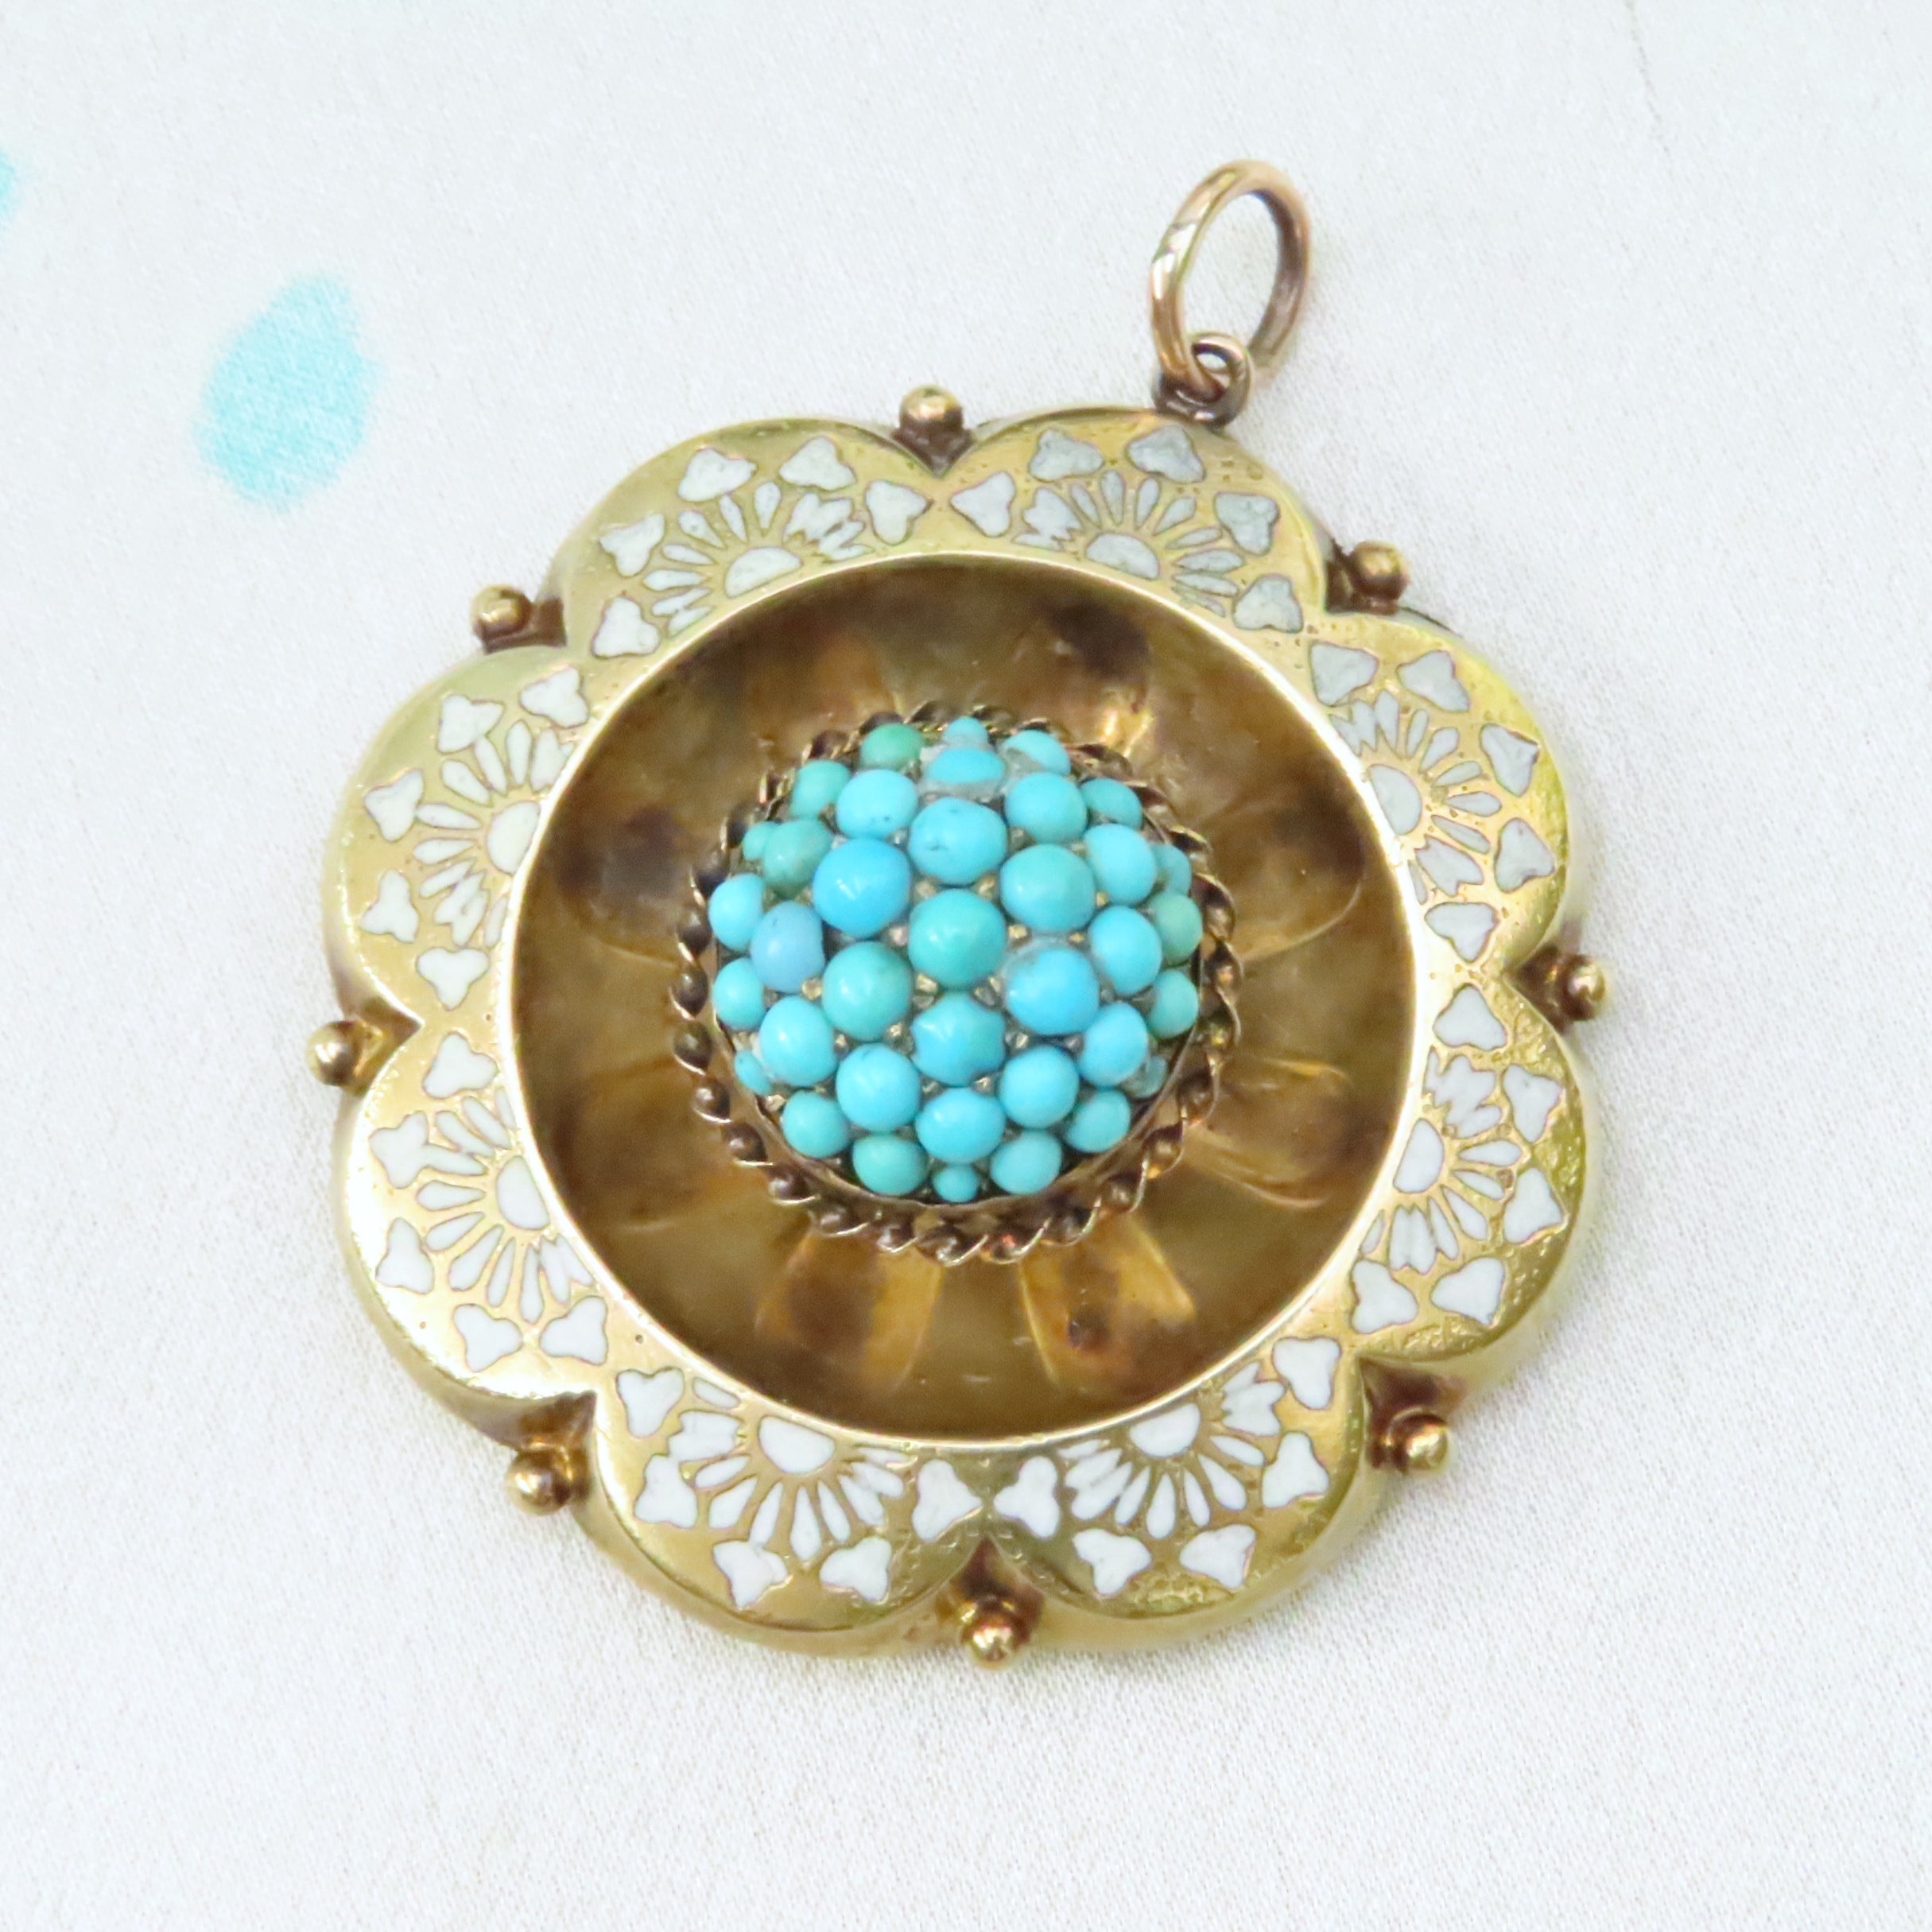 turquoise cabochon dome pendant with white enamel detail with a scalloped gold border in 12ct gold. Victorian dating to 1870.